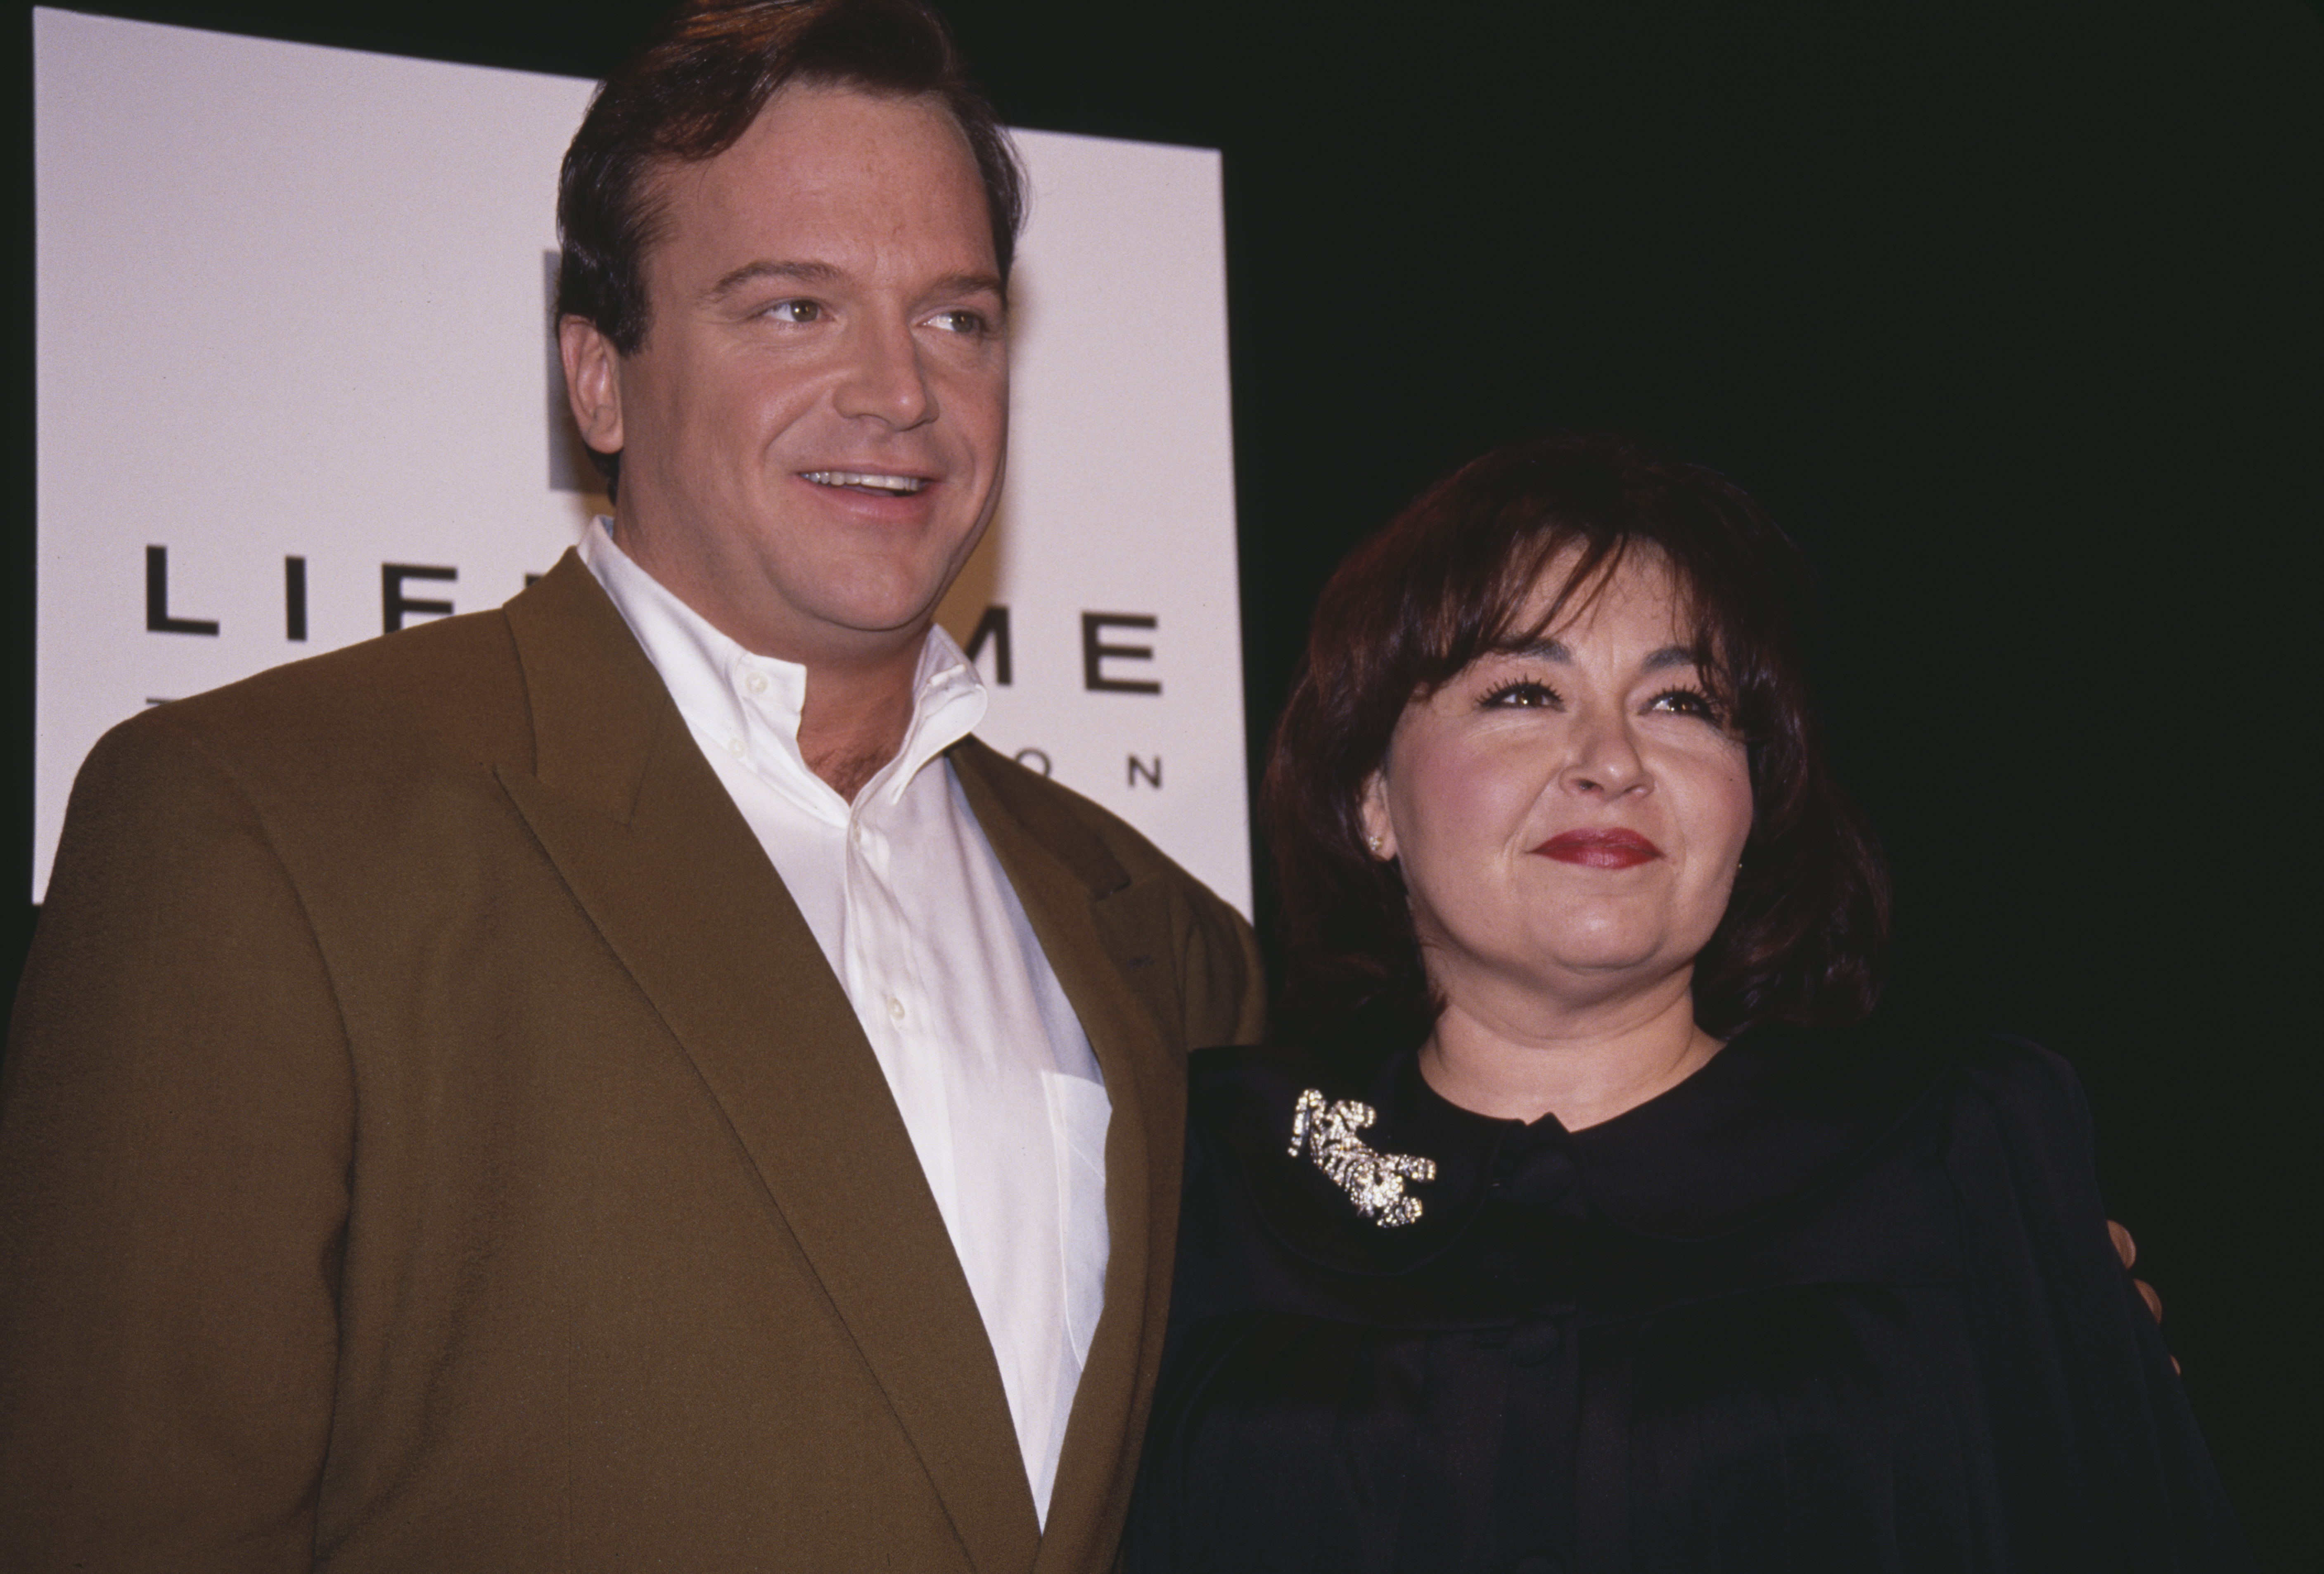 Tom Arnold and Roseanne Barr at a "Free to Laugh" Amnesty International benefit in Hollywood, California on March 8, 1992 | Source: Getty Images